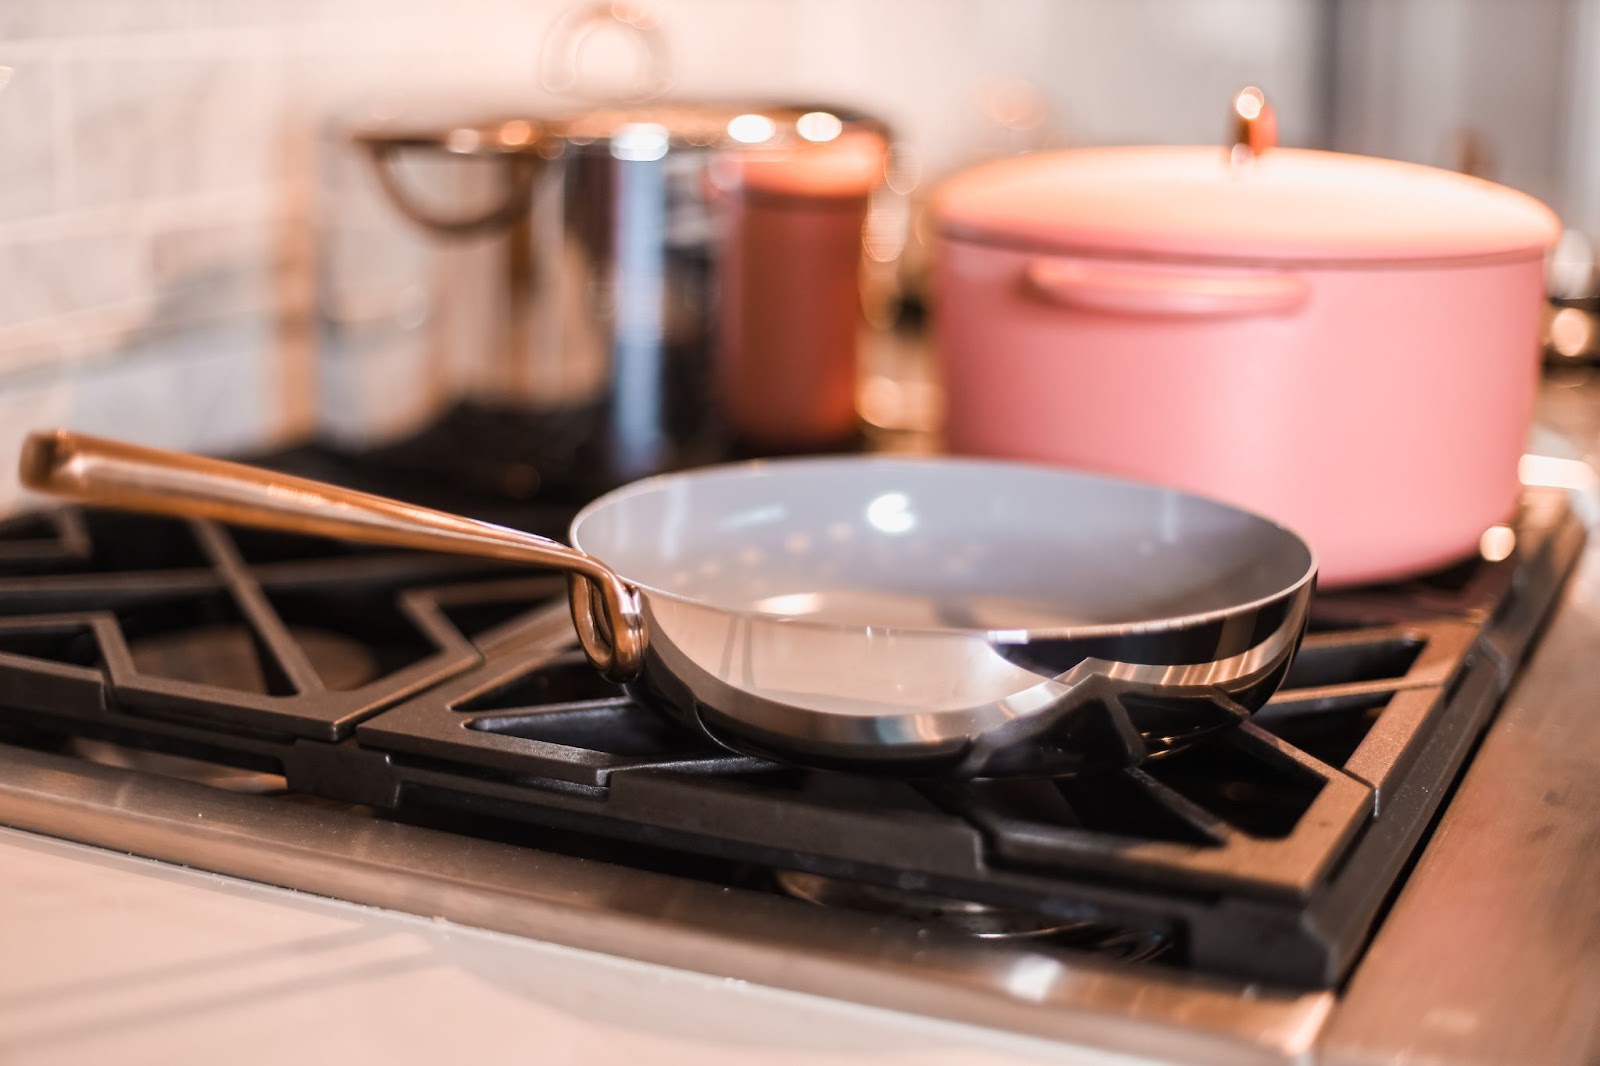 Great Jones Cookware Review 2021: Dutch Ovens, Stockpots & More